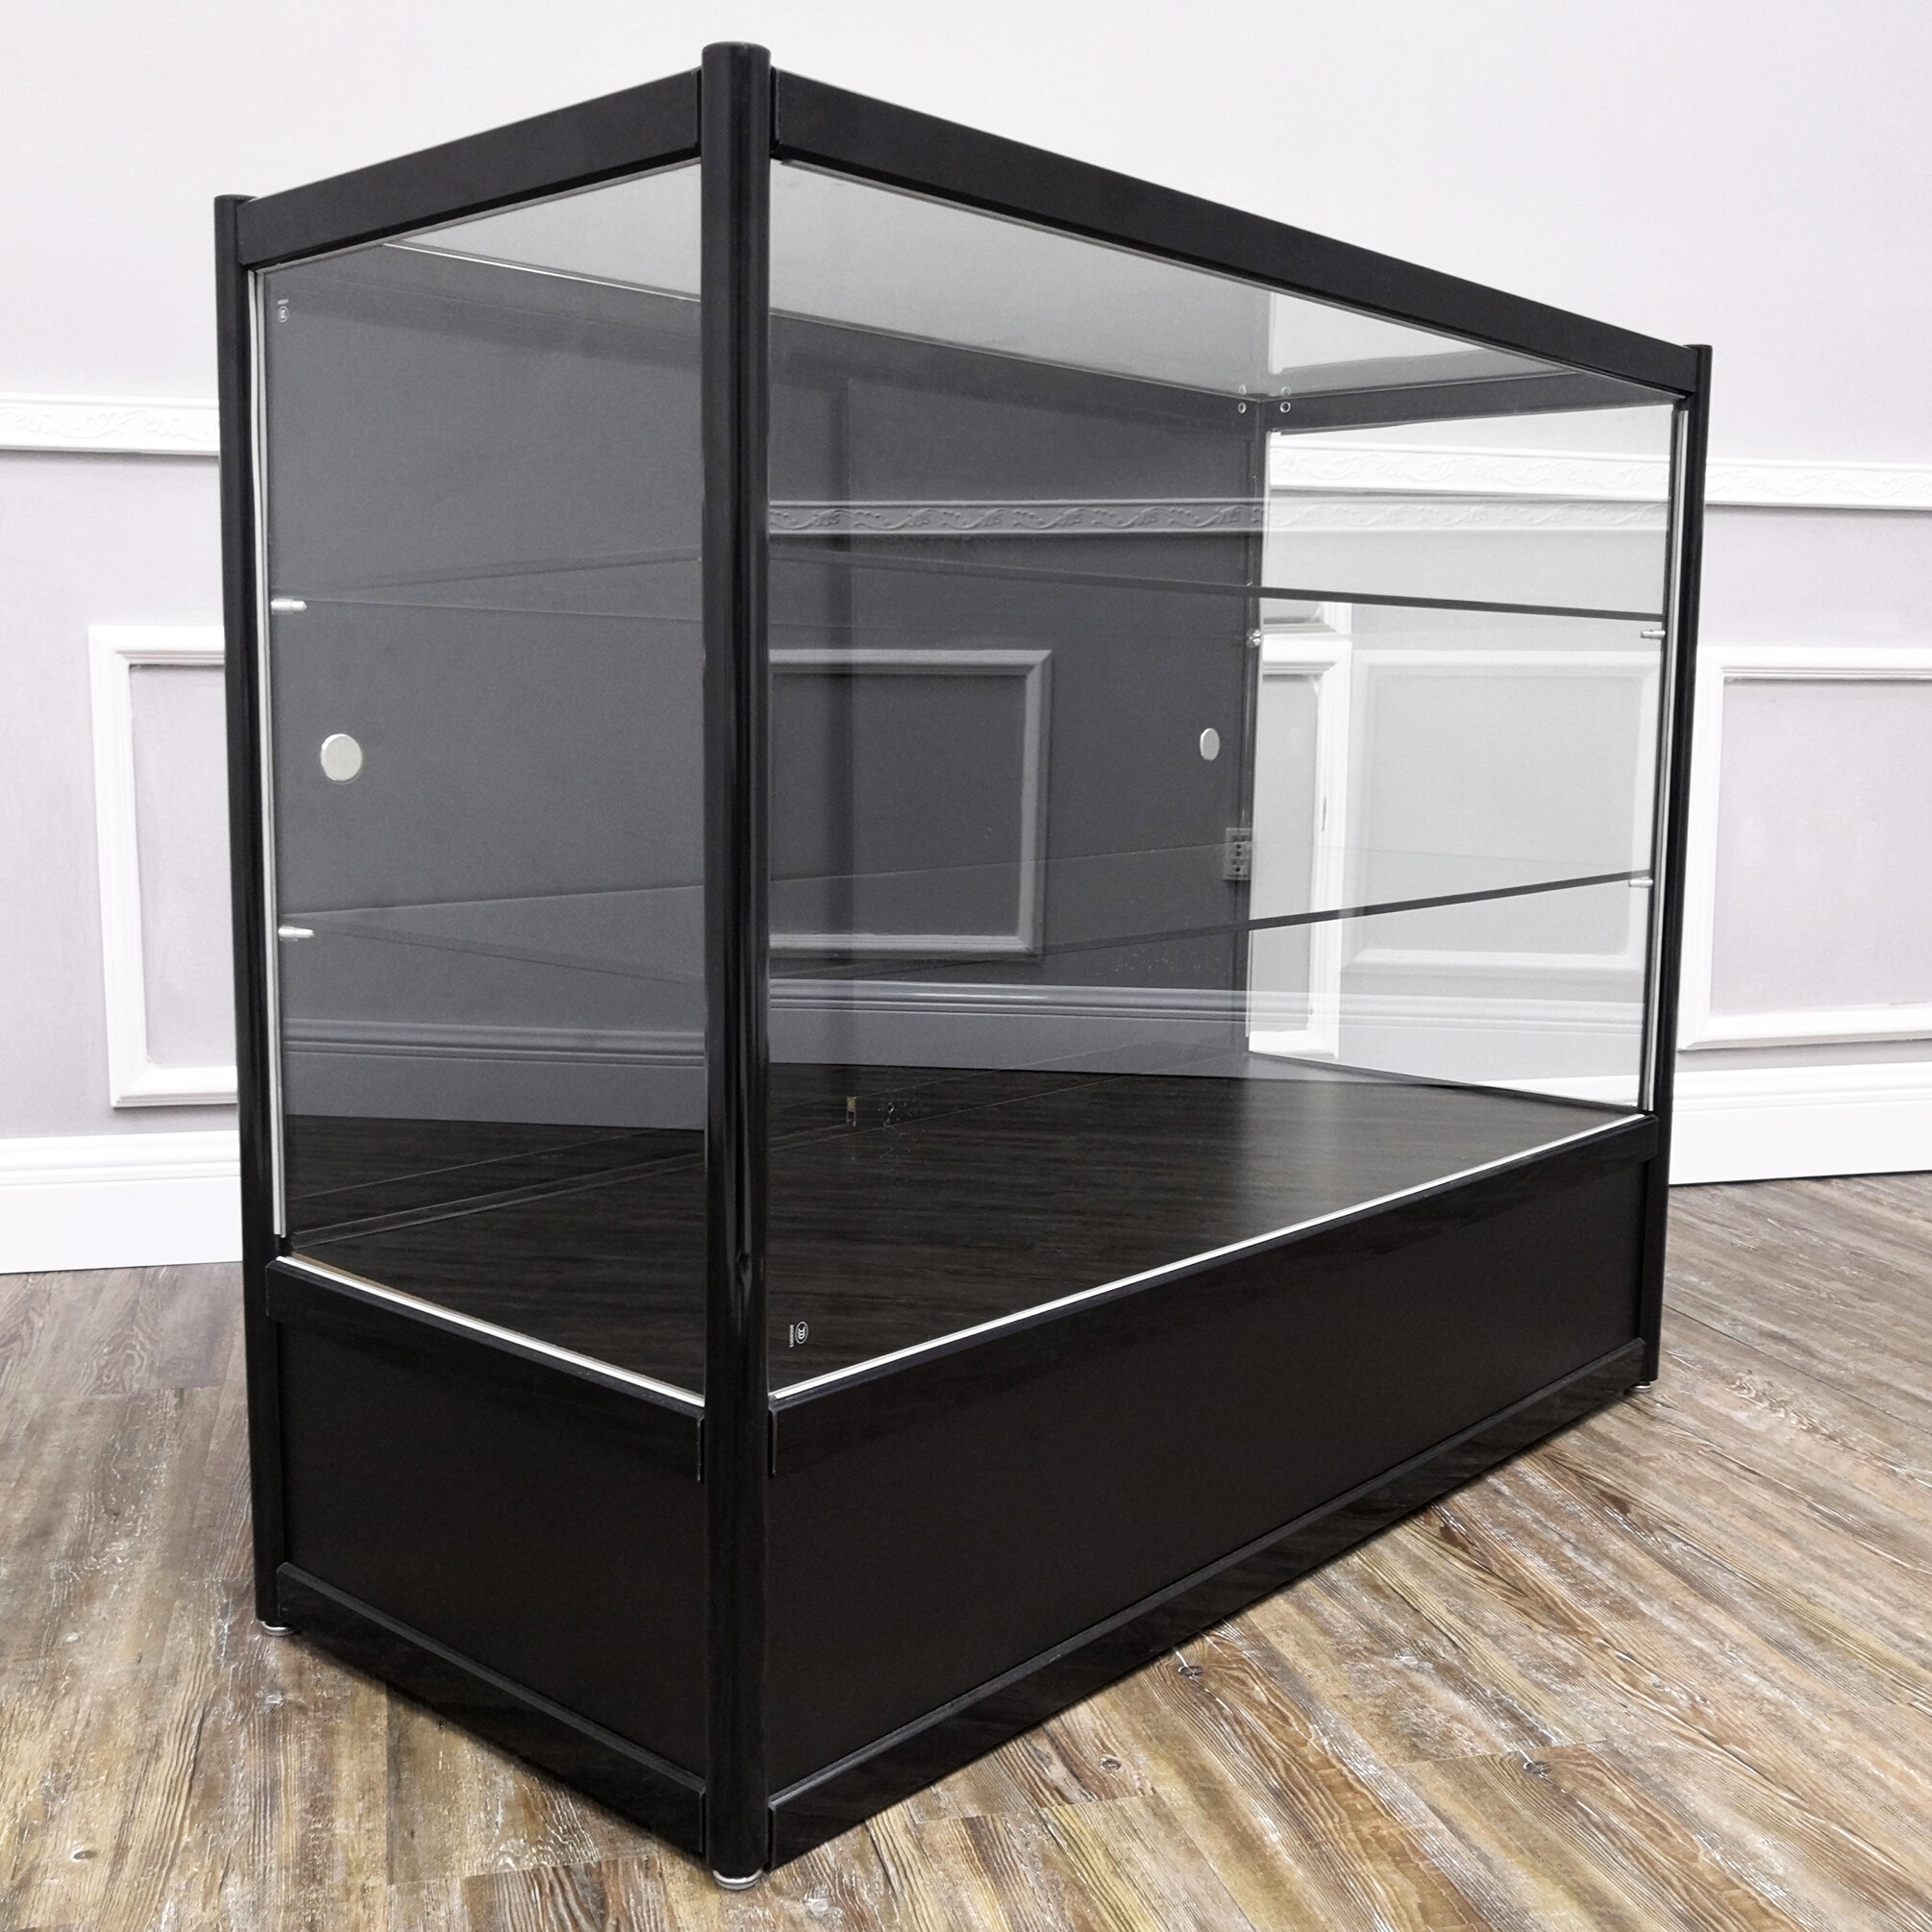 Glass Display Case, Full Vision Display Case